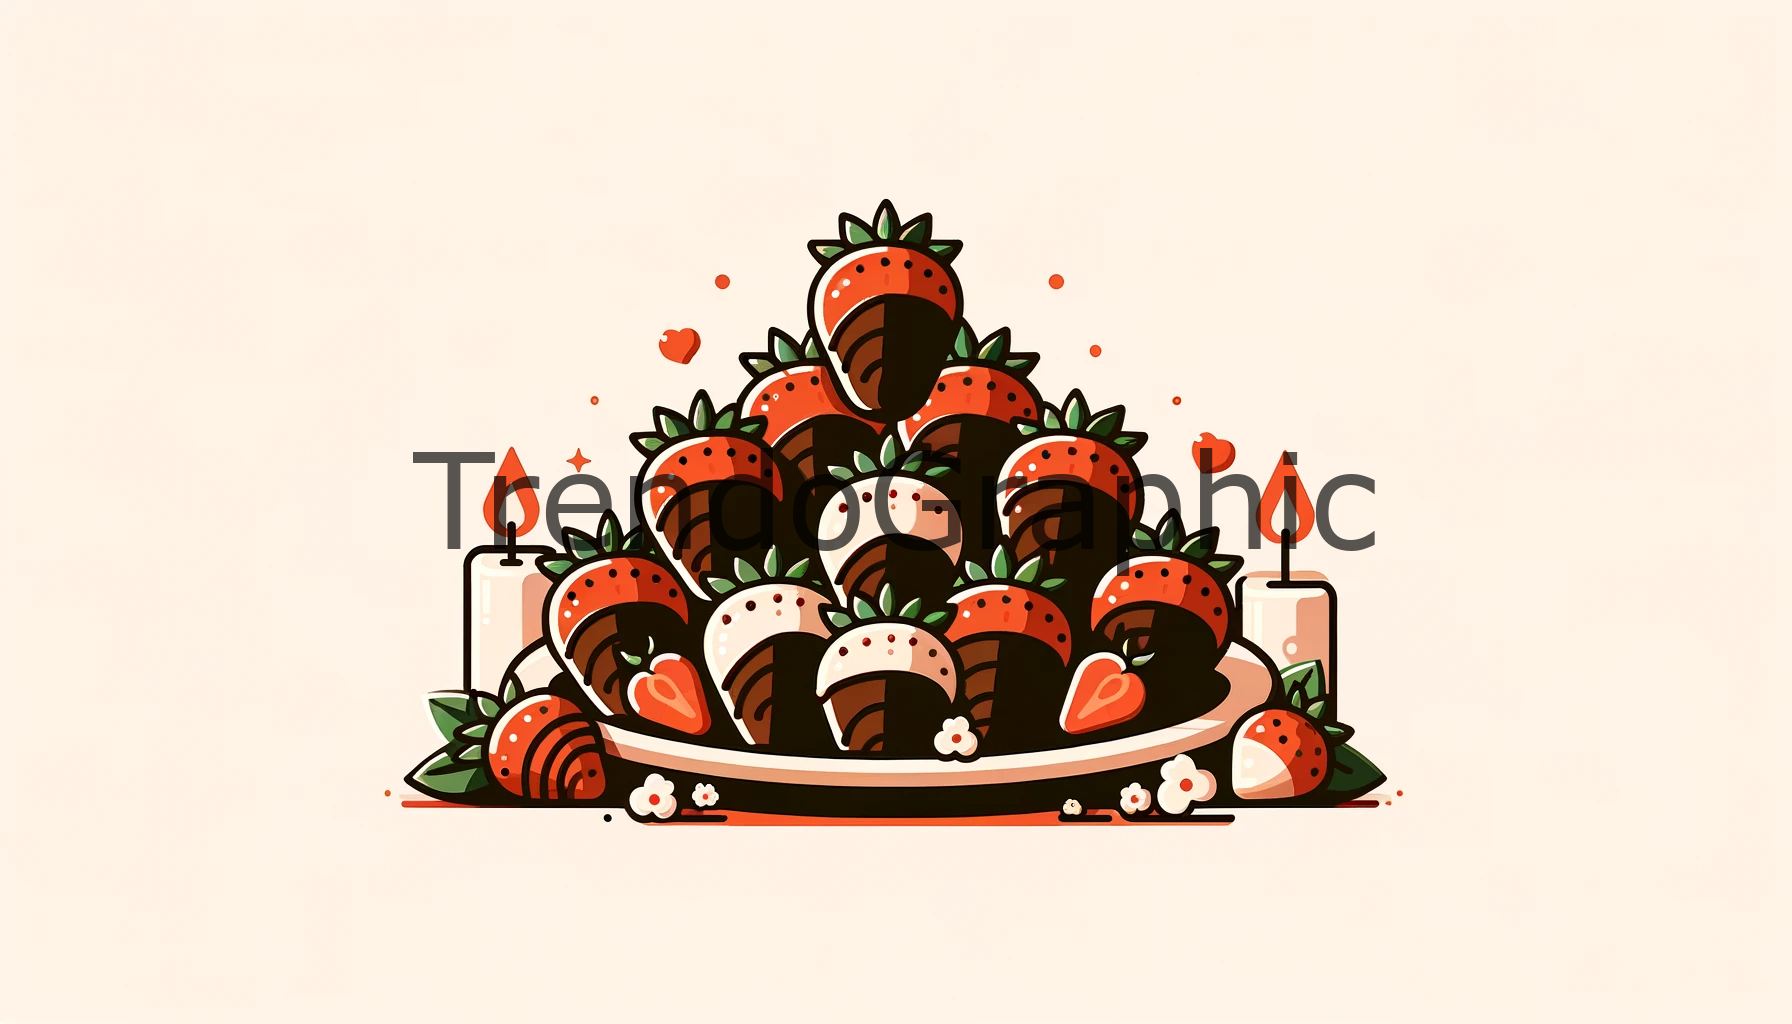 Delightful Chocolate-Covered Strawberries for a Romantic Treat